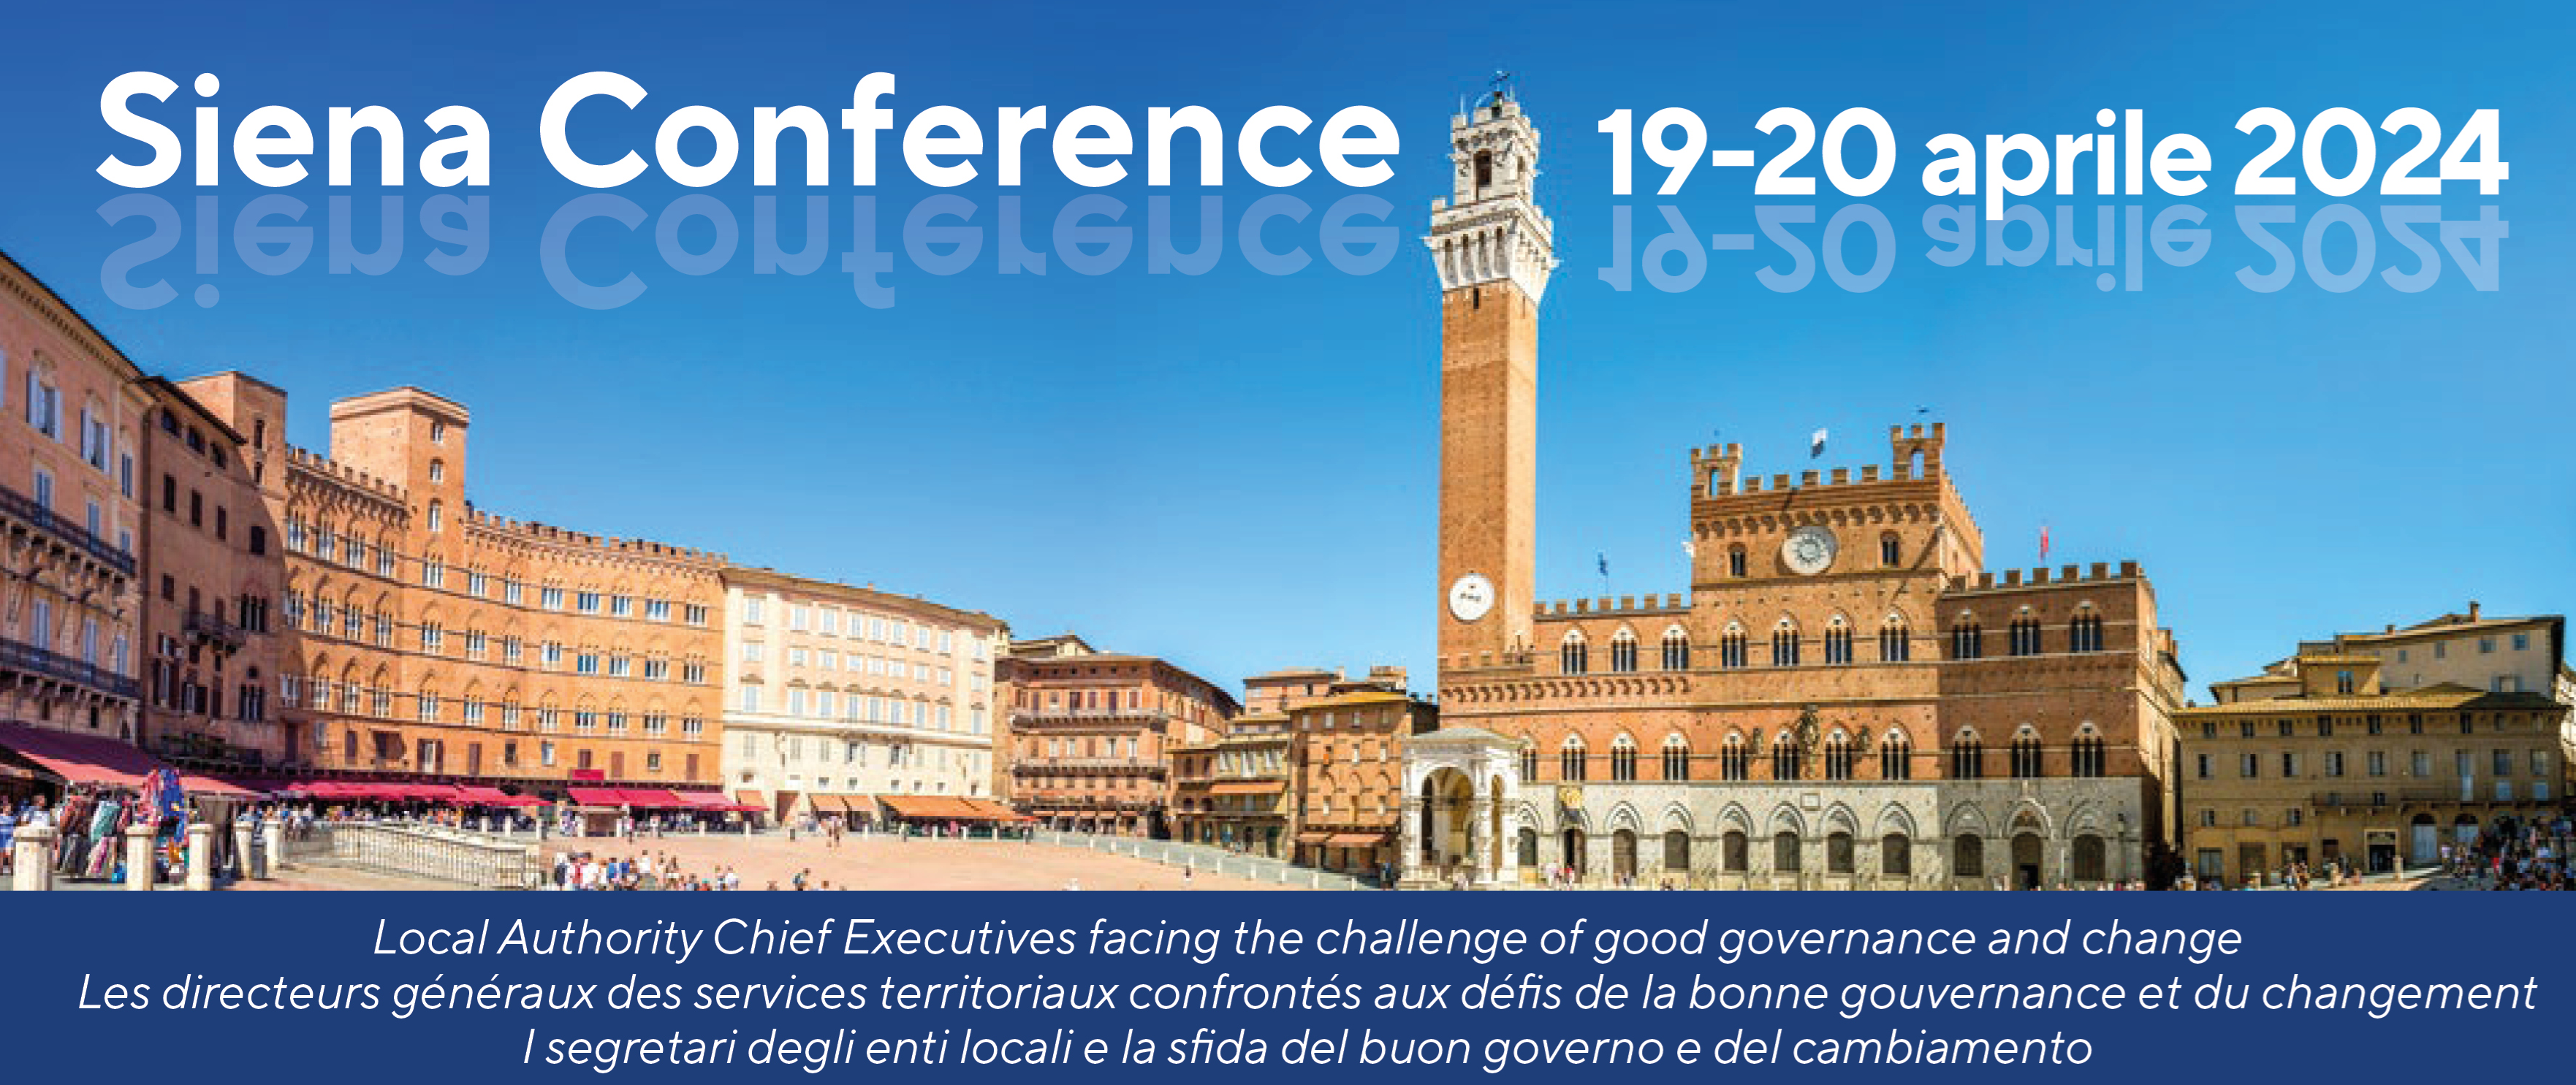 Siena conference